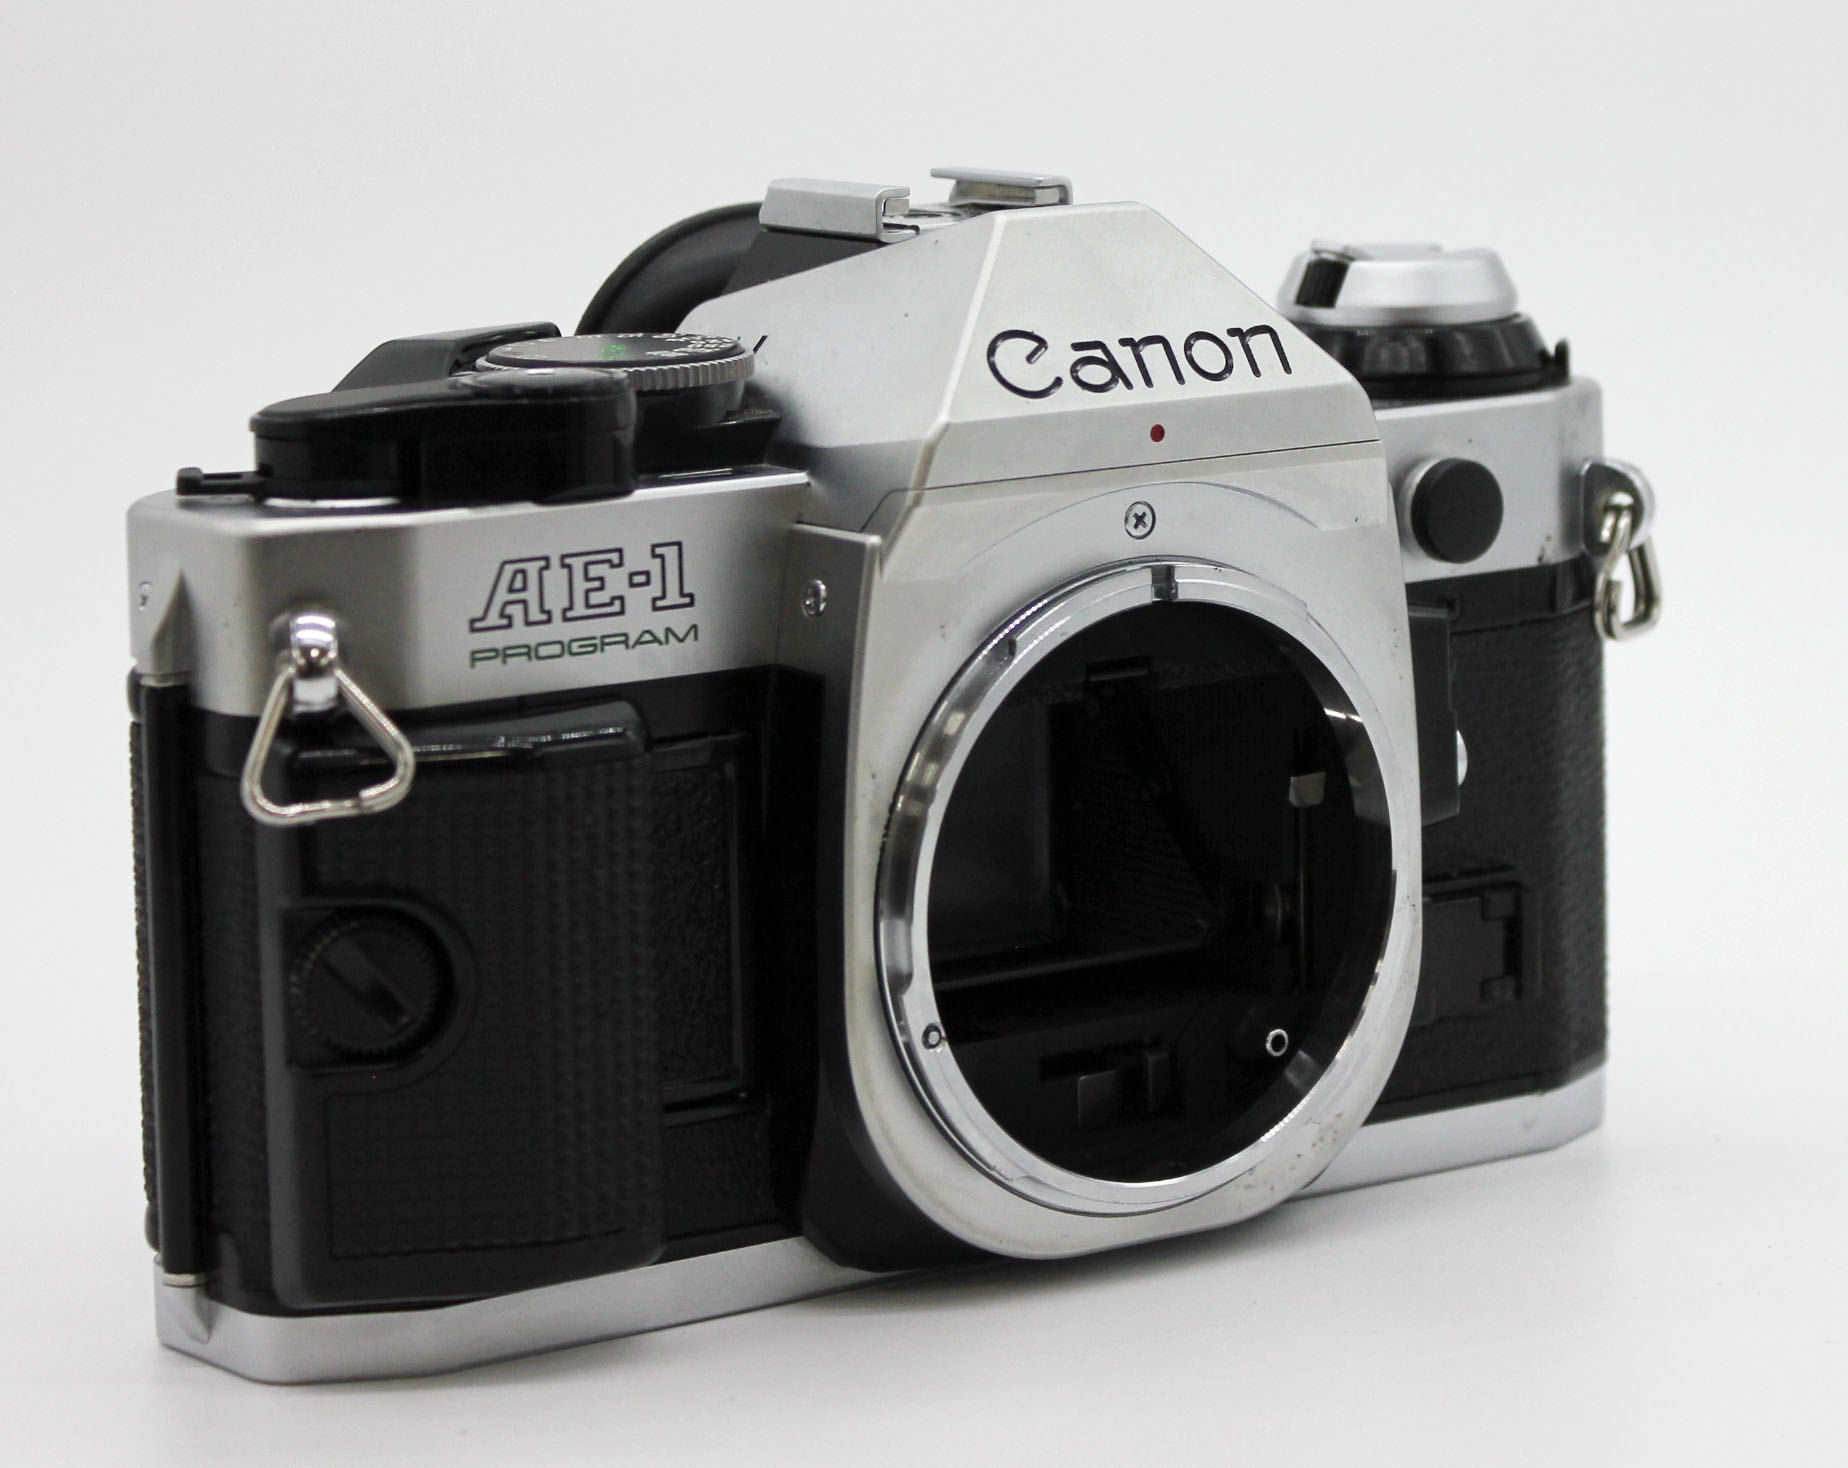 Canon AE-1 Program 35mm SLR Film Camera with New FD NFD 50mm F/1.4 Lens from Japan Photo 2